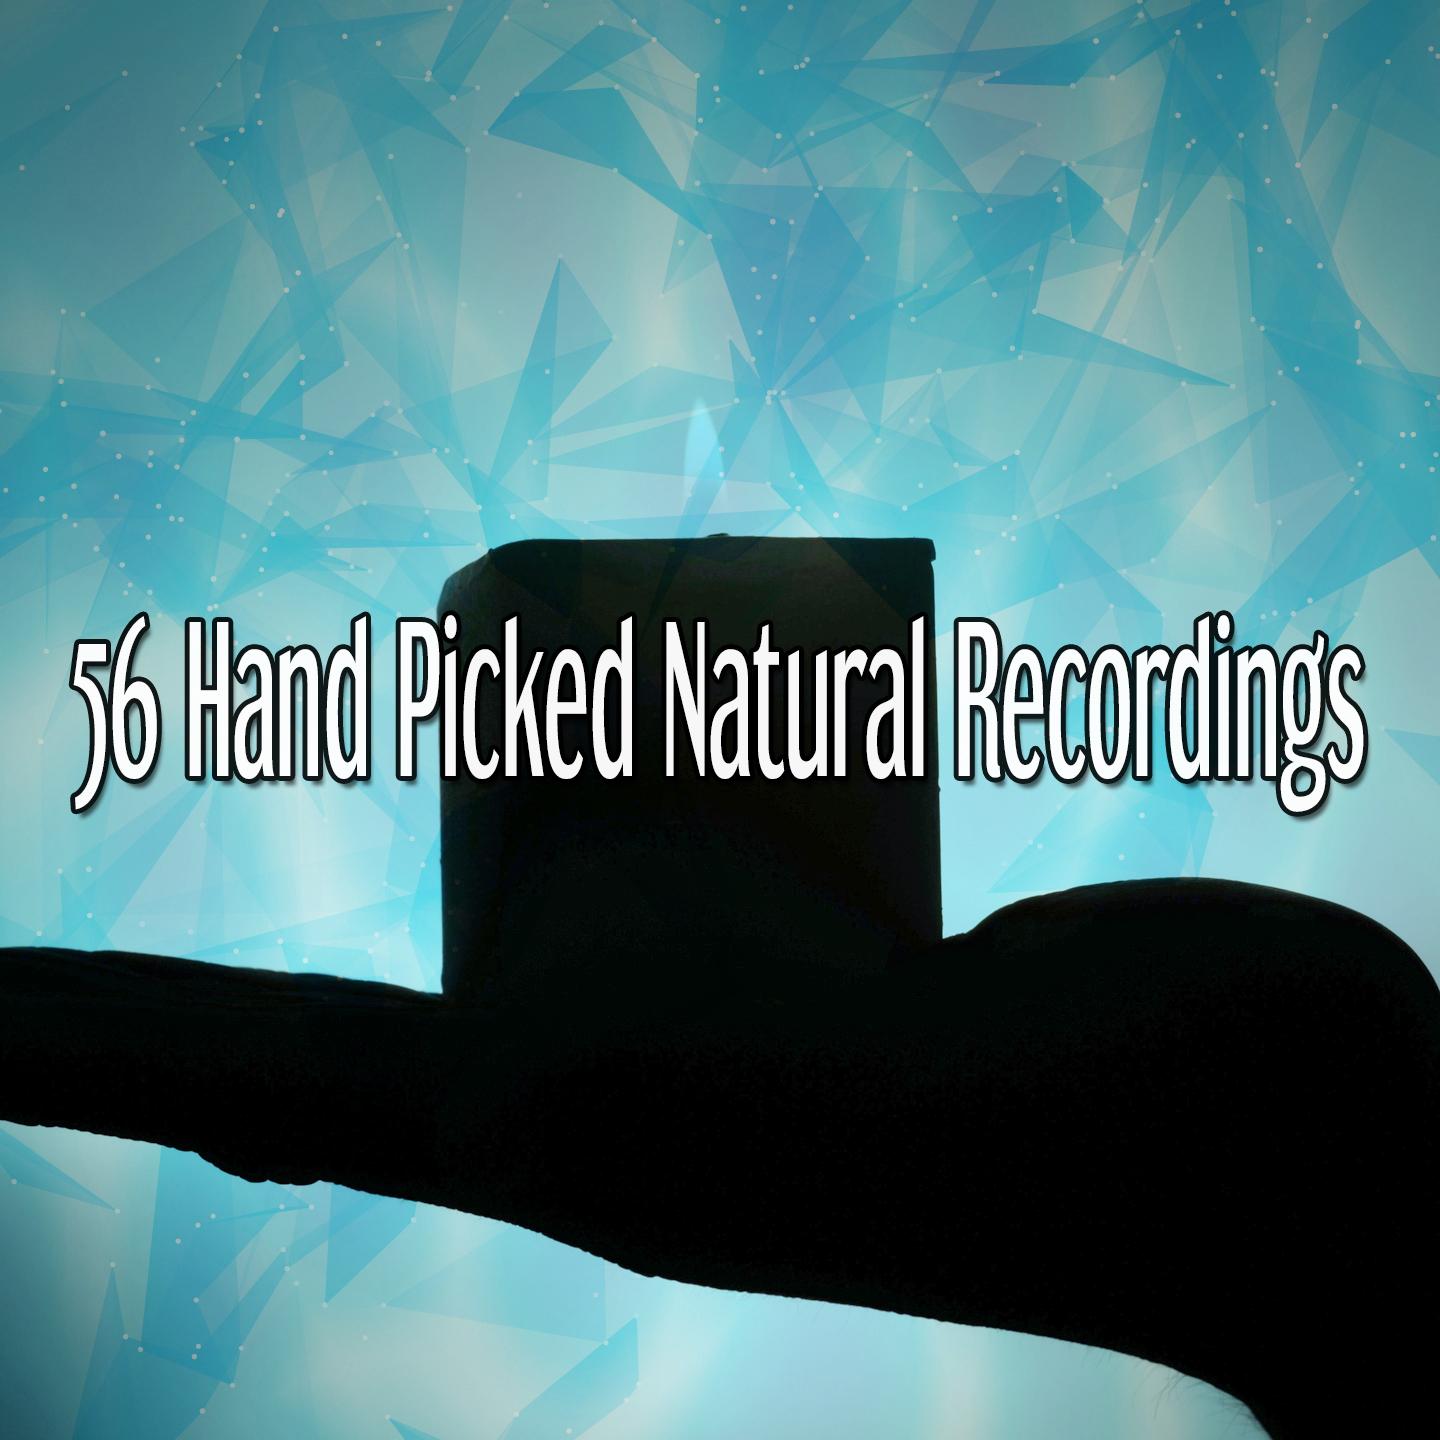 56 Hand Picked Natural Recordings